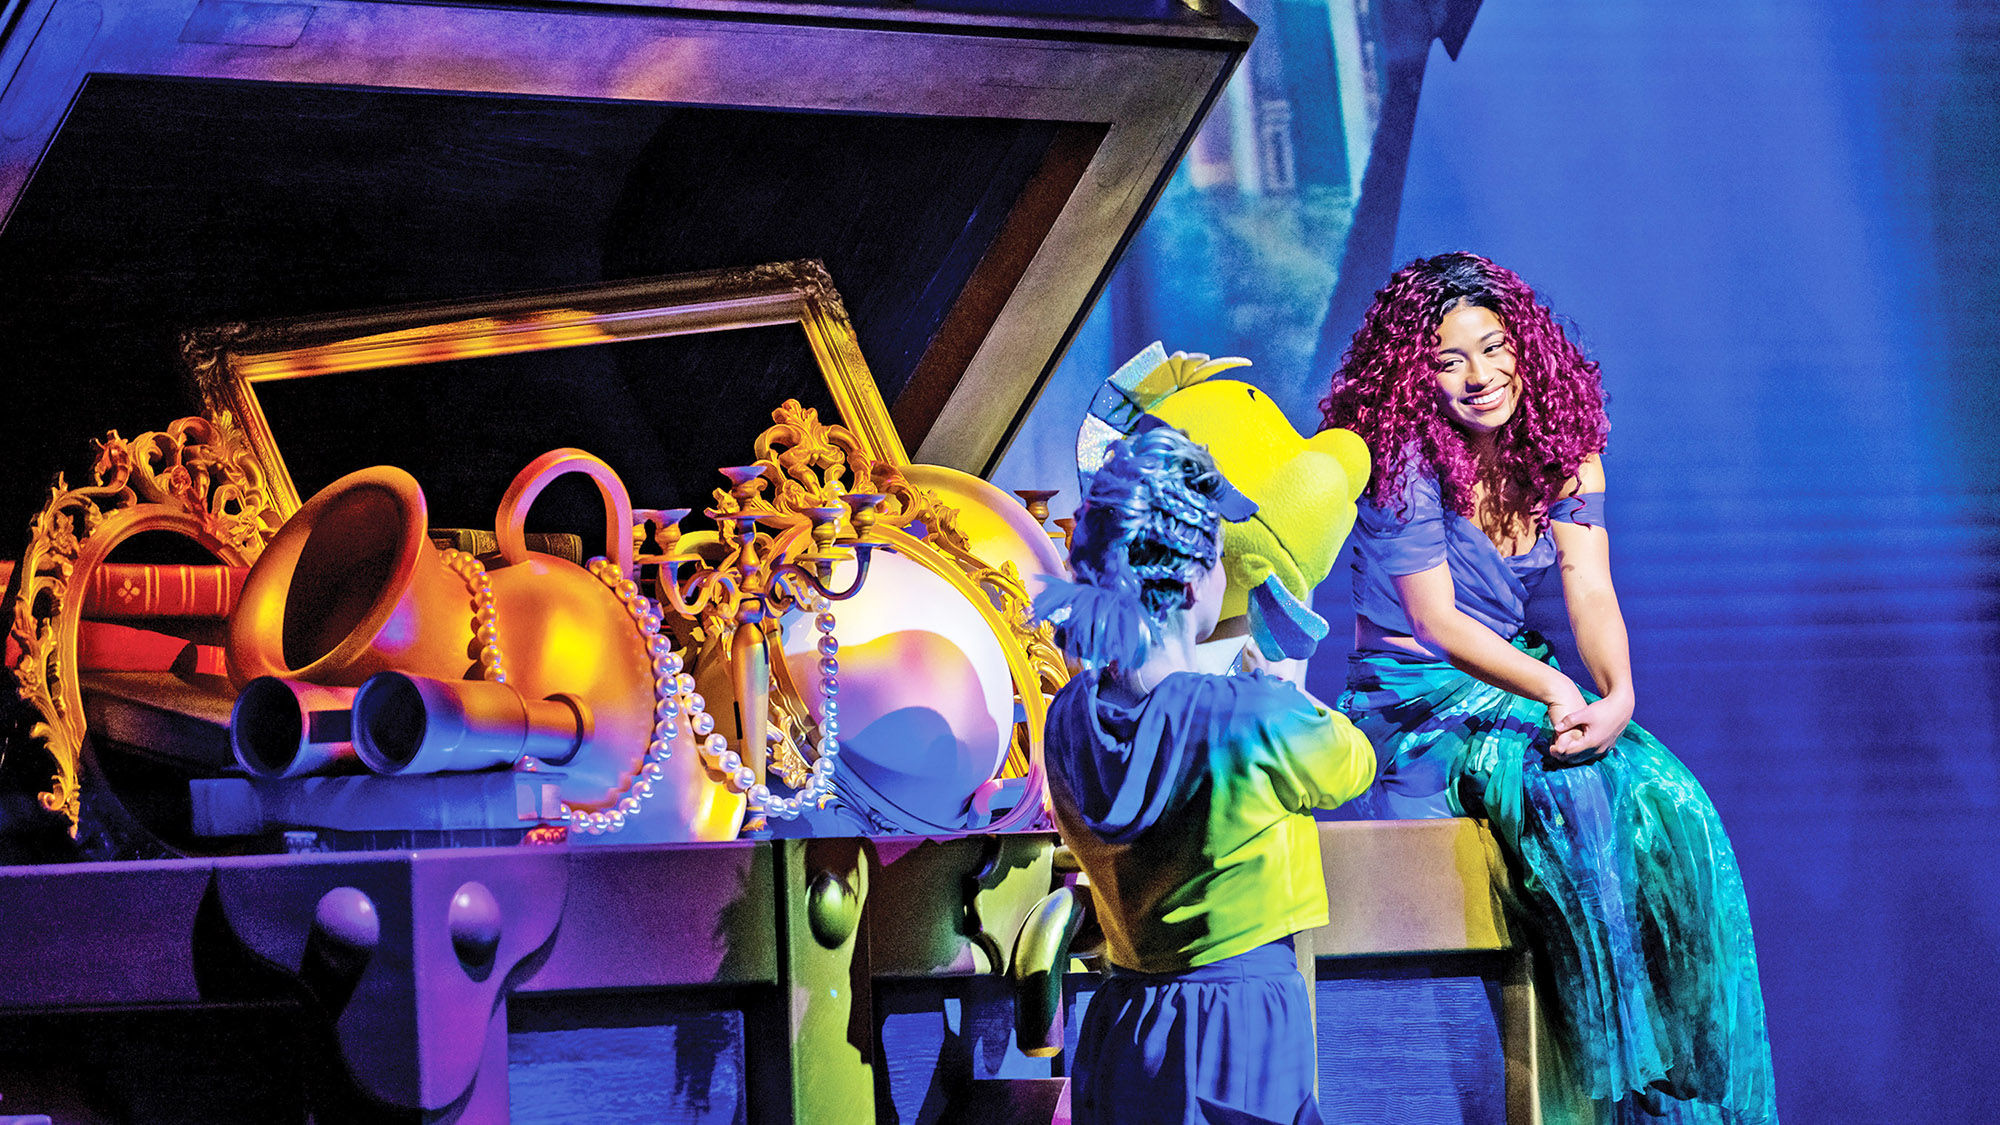 Developed exclusively for the Disney Wish, "The Little Mermaid" is a Broadway-style stage adaptation of the 1989 Disney movie.